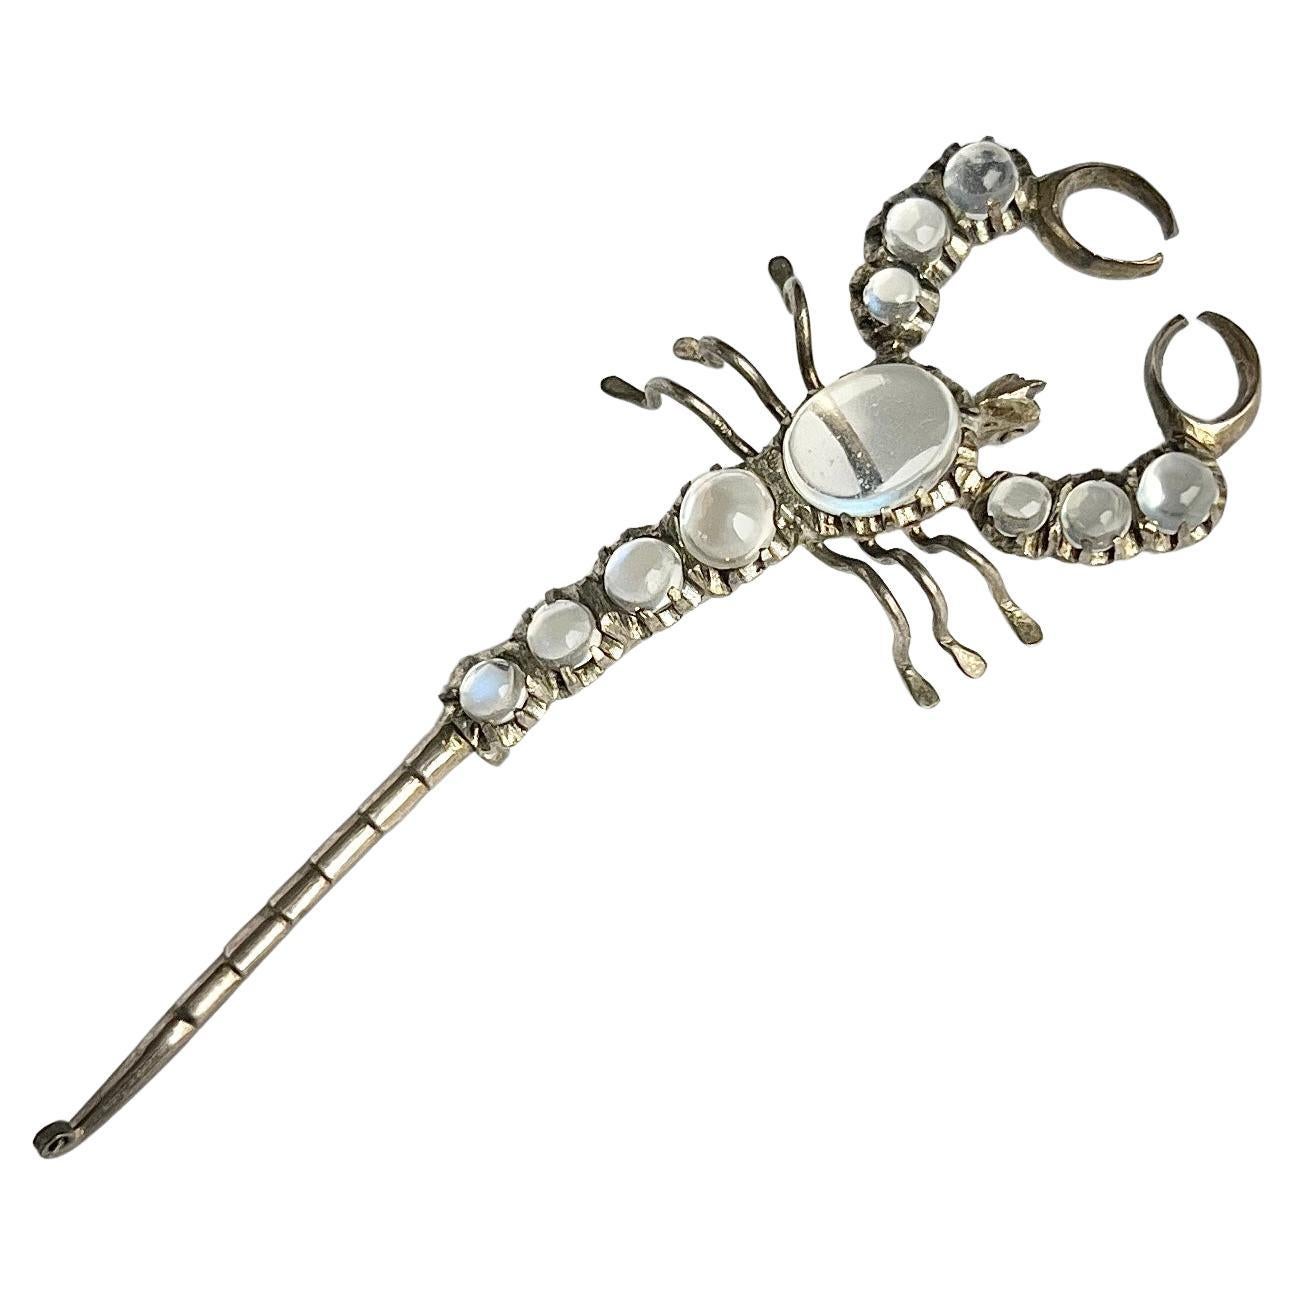 Vintage Silver and Moonstone Scorpion Brooch